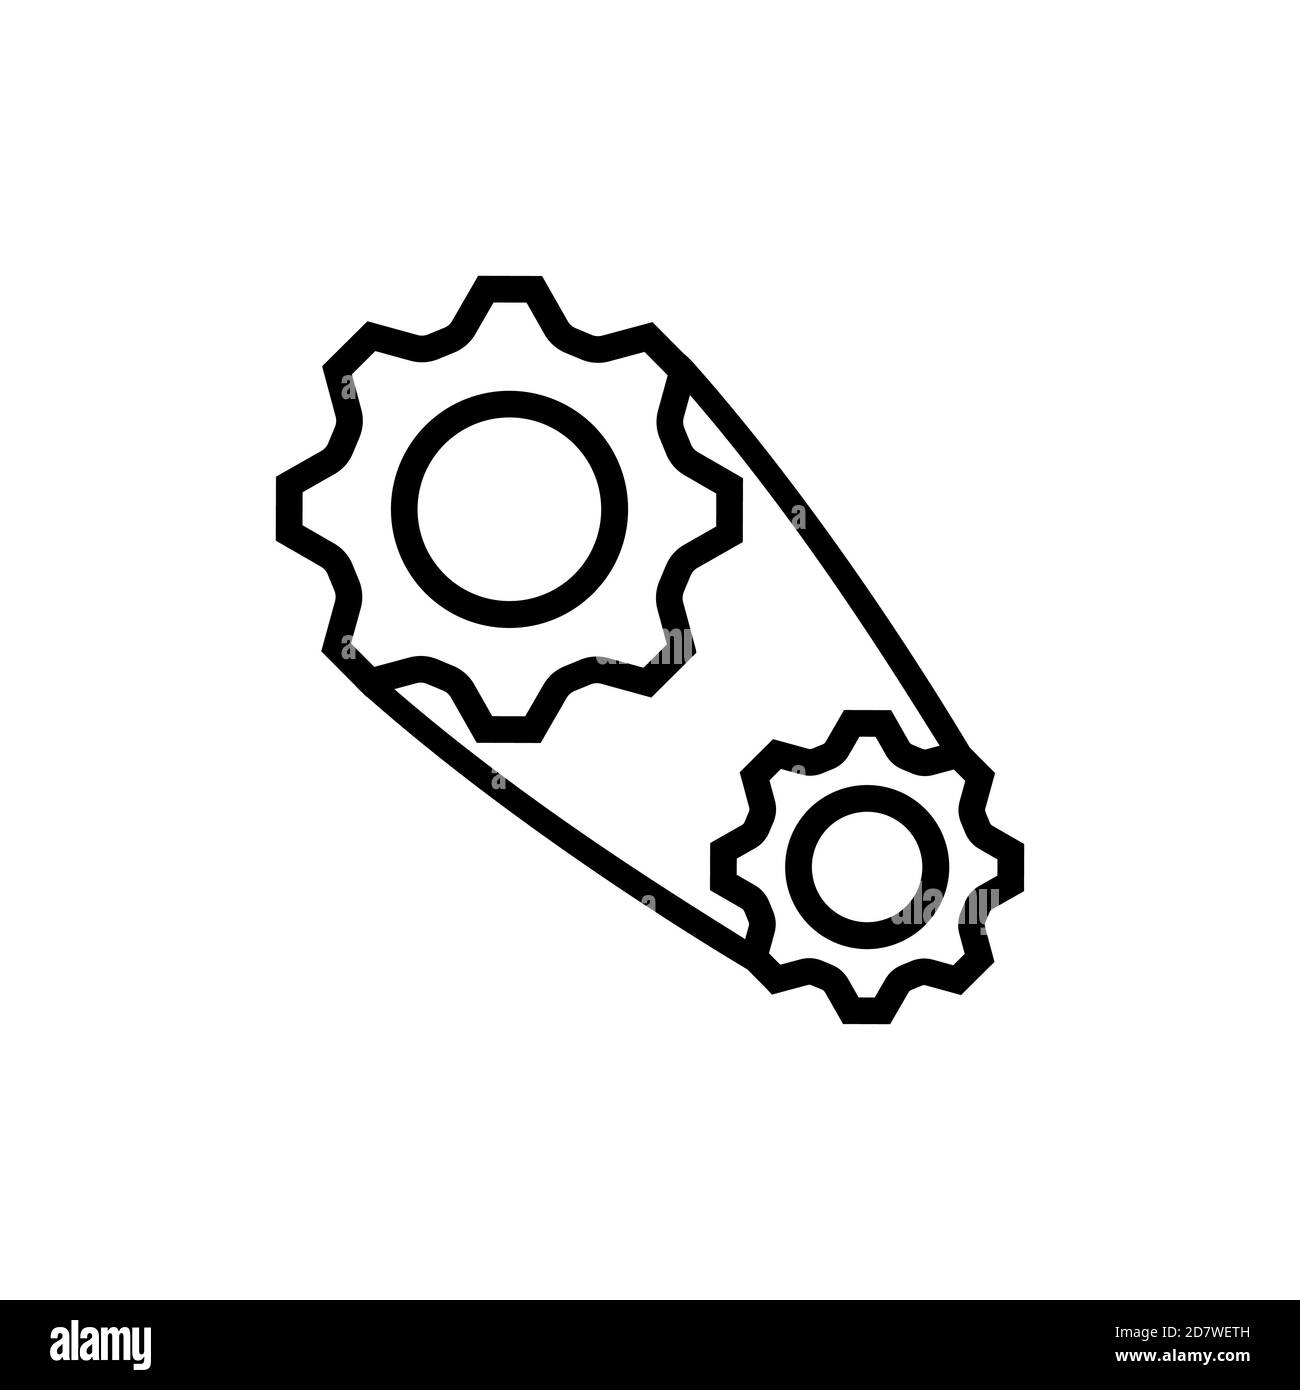 Setting gears icon in black. Vector on isolated white background. EPS 10 Stock Vector